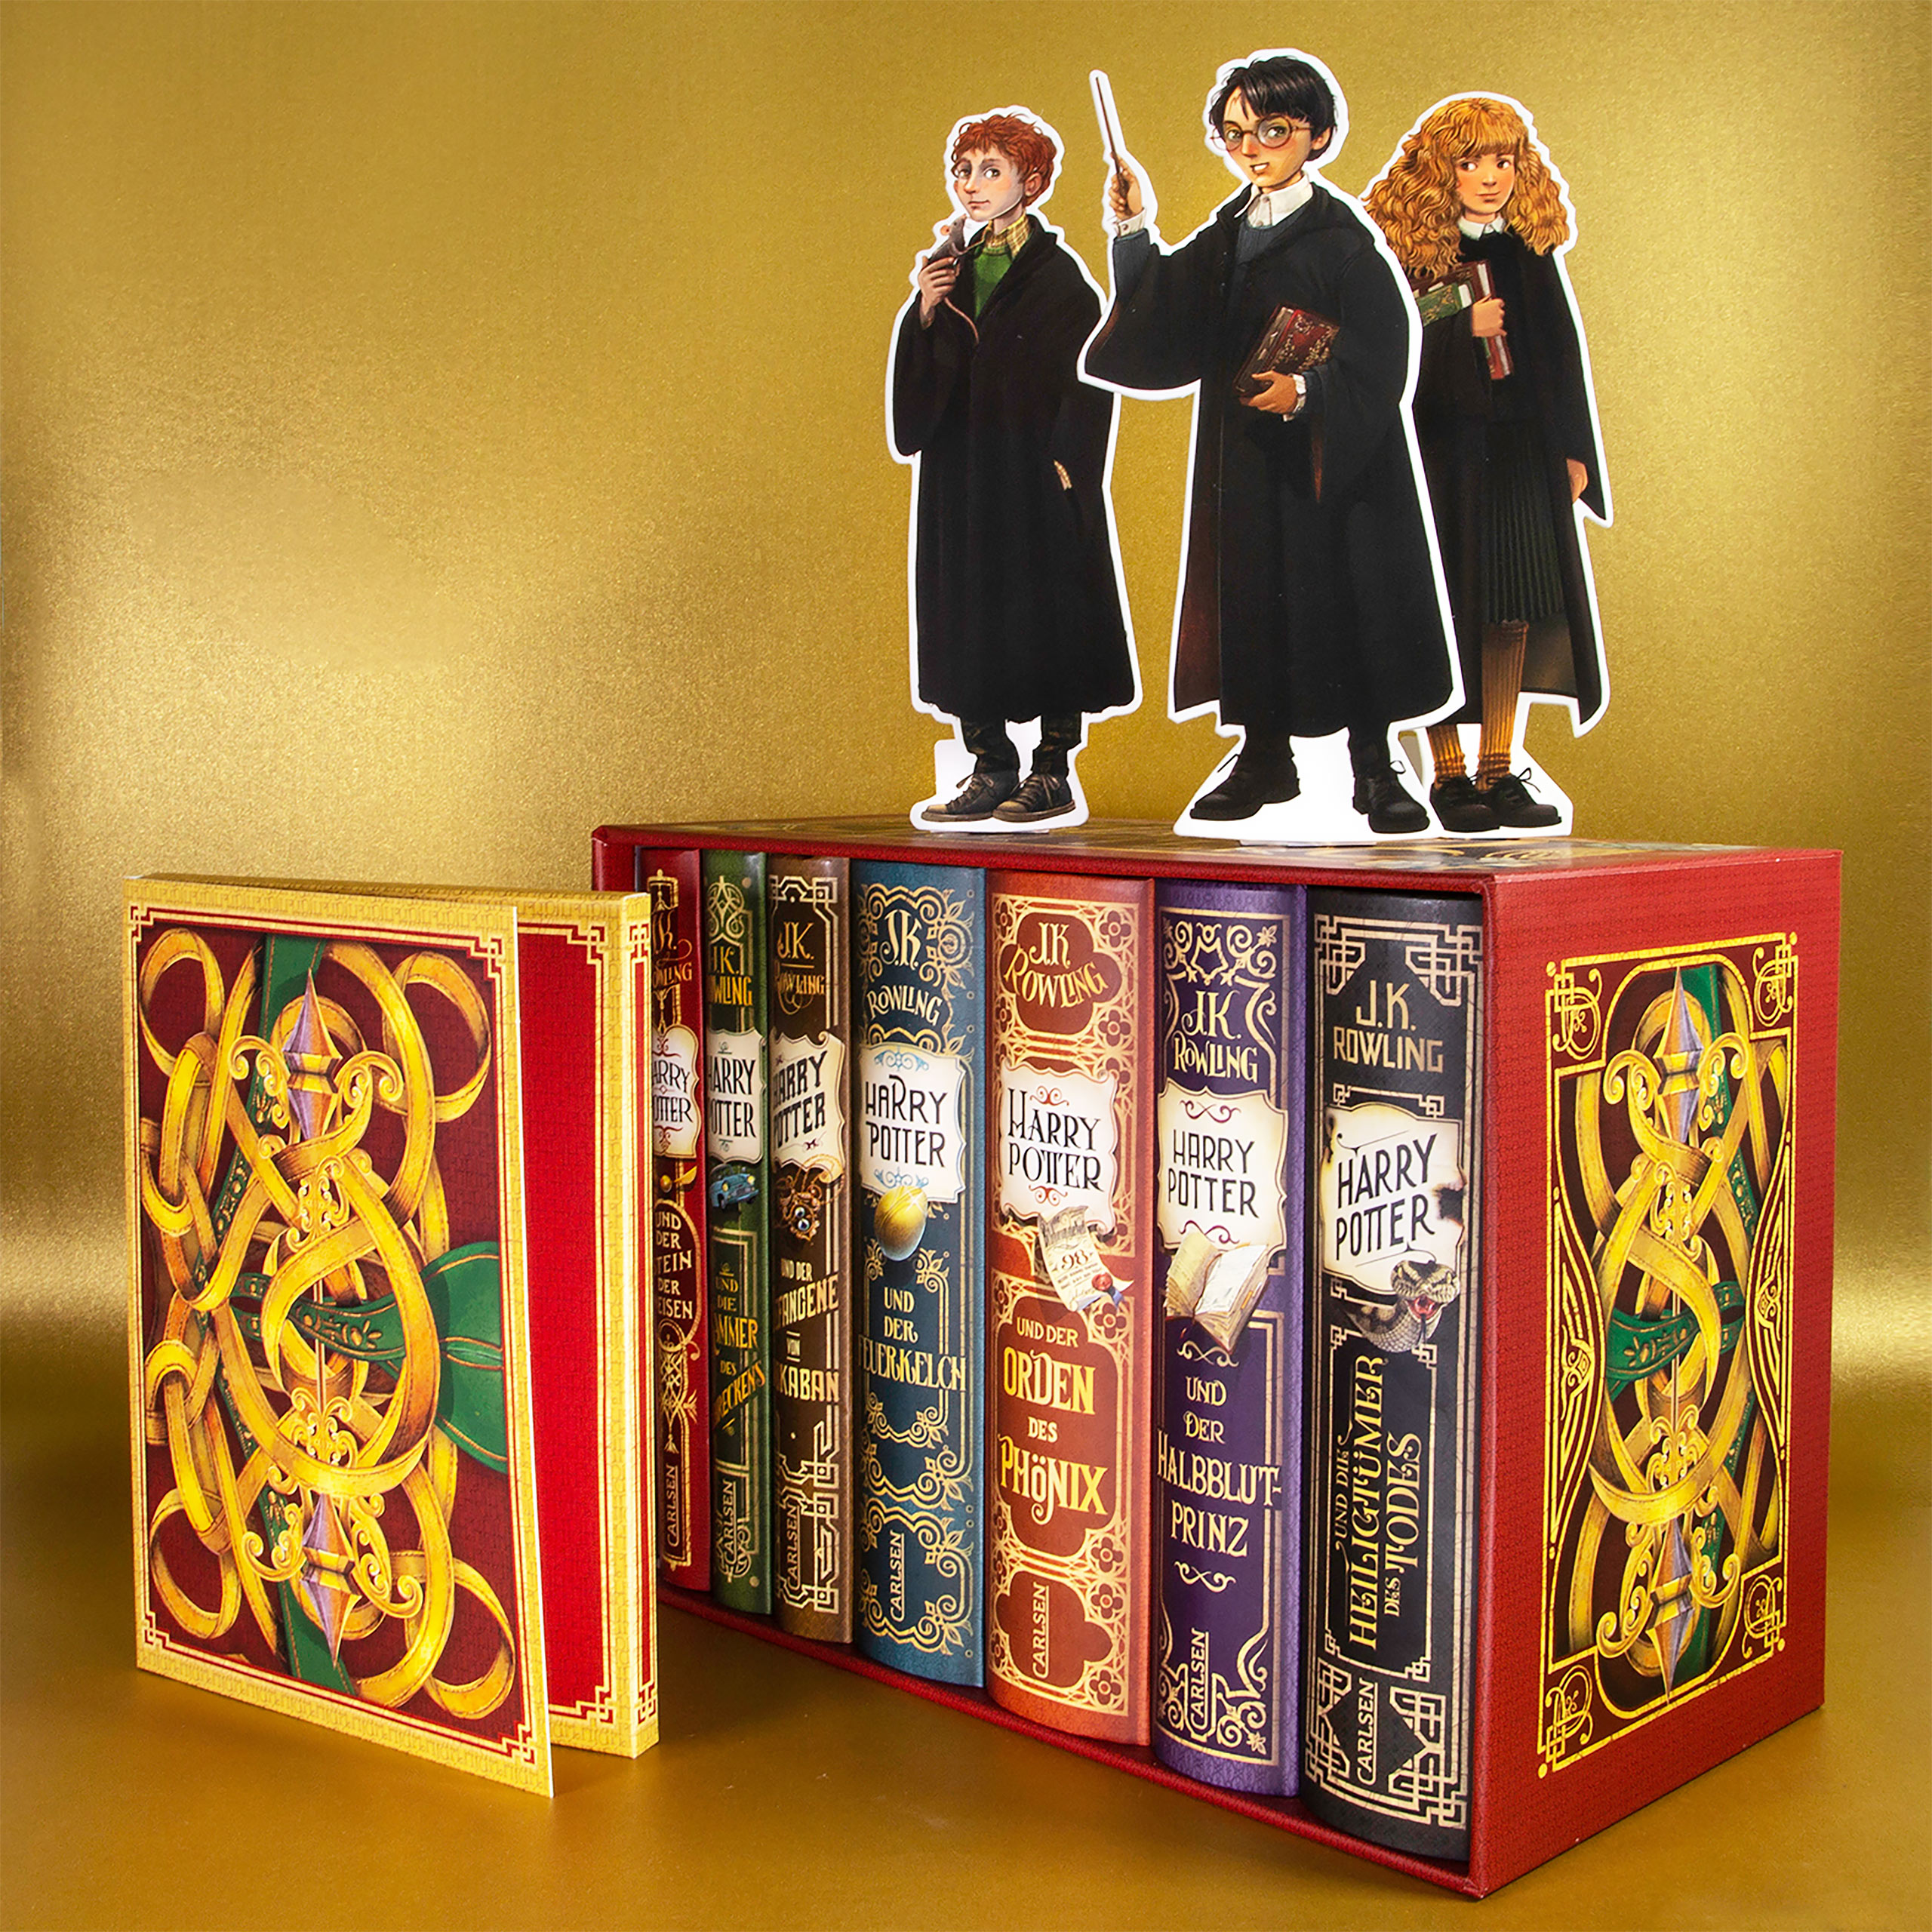 Harry Potter - Volumes 1-7 in Box Set with Exclusive Extra